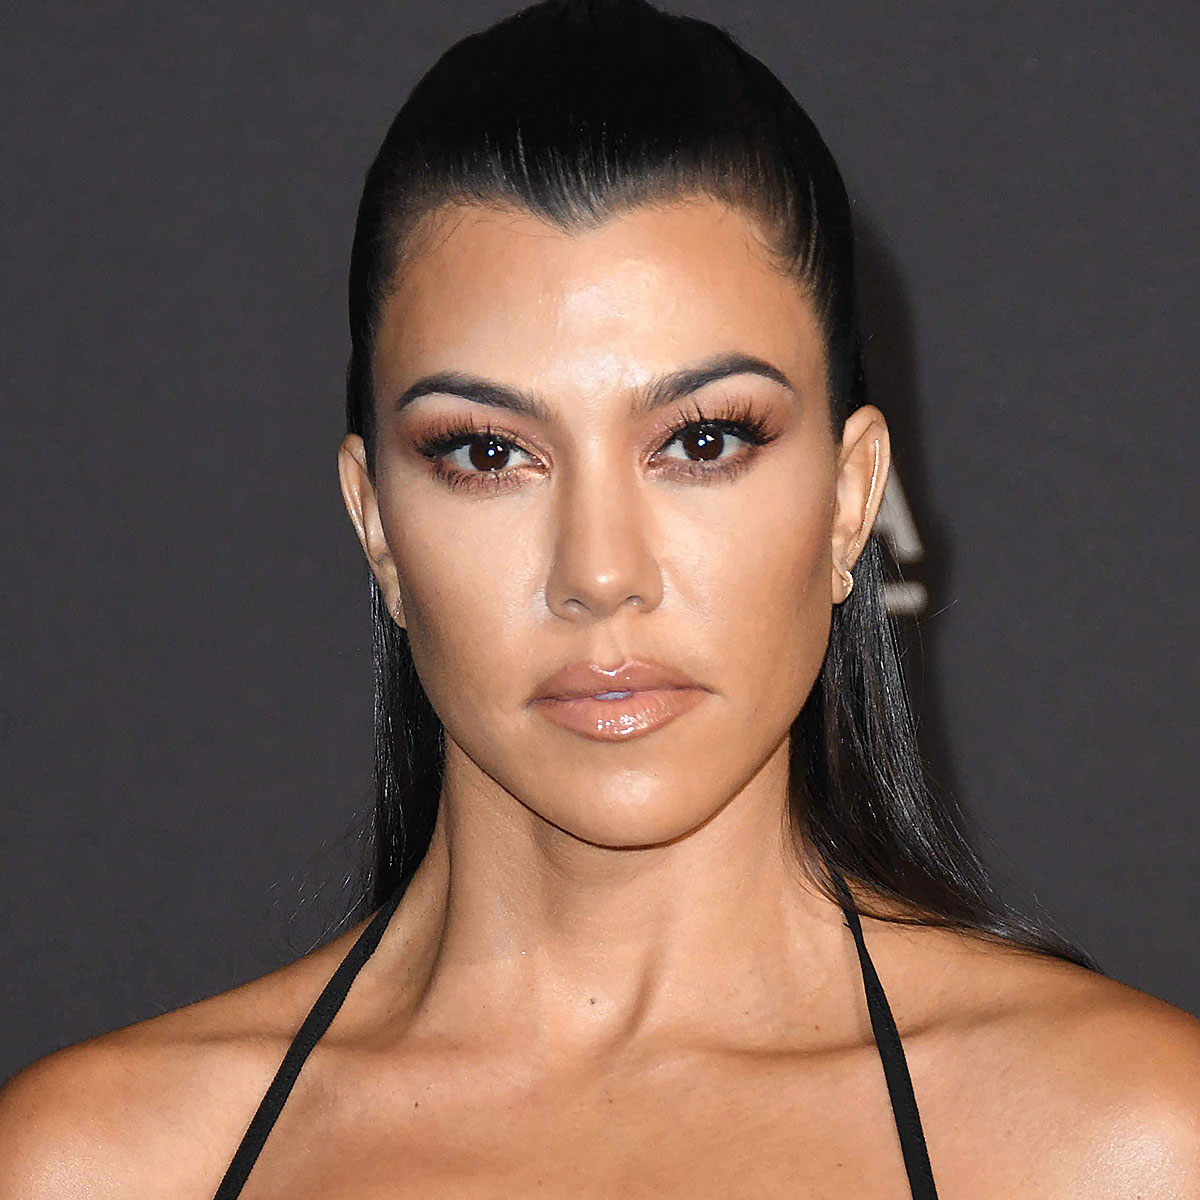 Kourtney Kardashian Takes Off Her Makeup And Gives Fans A Glimpse Of Her ‘Real Face’ In Workout Selfie On Instagram